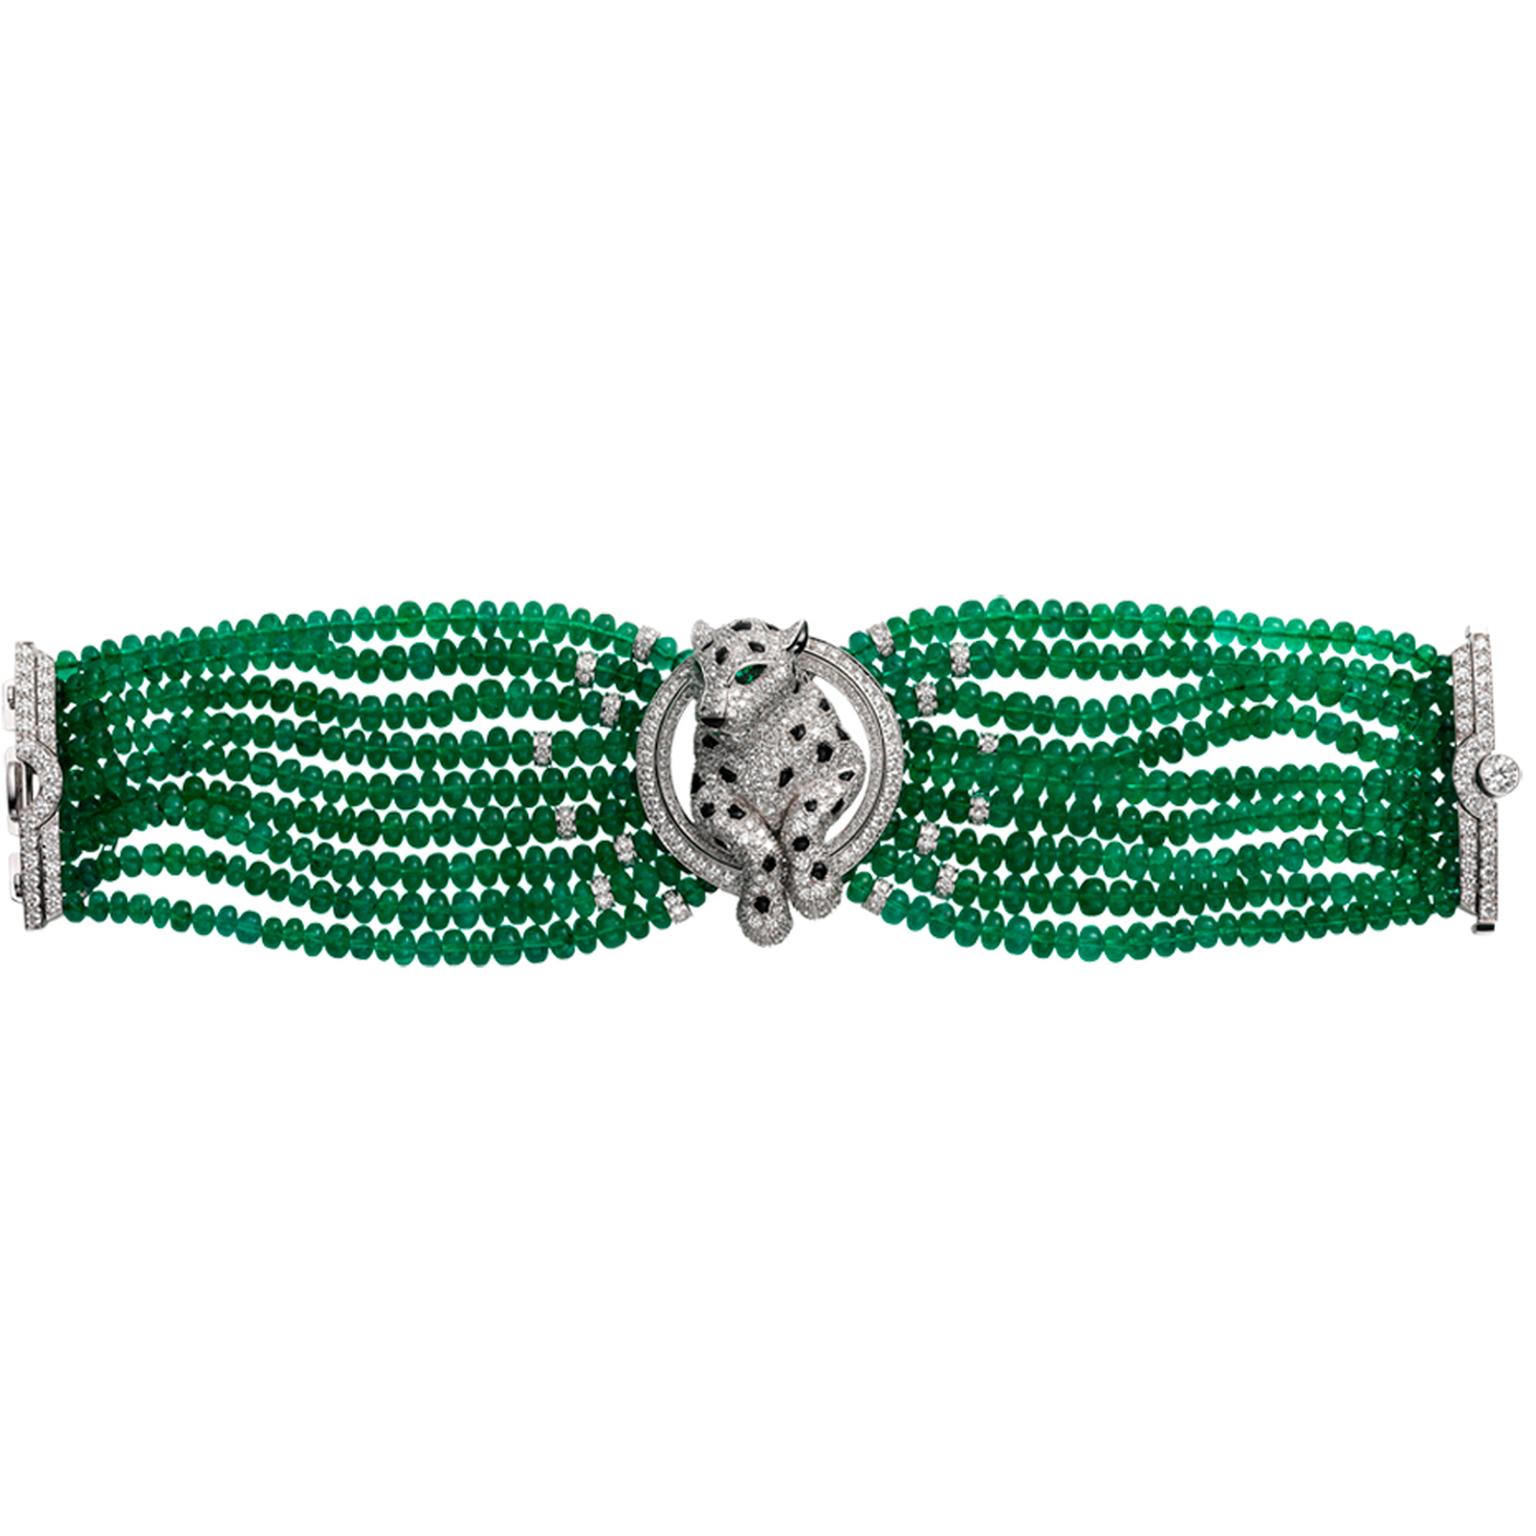 Cartier paid tribute to its famous feline, the Panther, who celebrated his 100th anniversary in style appearing on this secret watch in 2014 studded with diamonds and strung on an exotic 577 emerald bead bracelet.